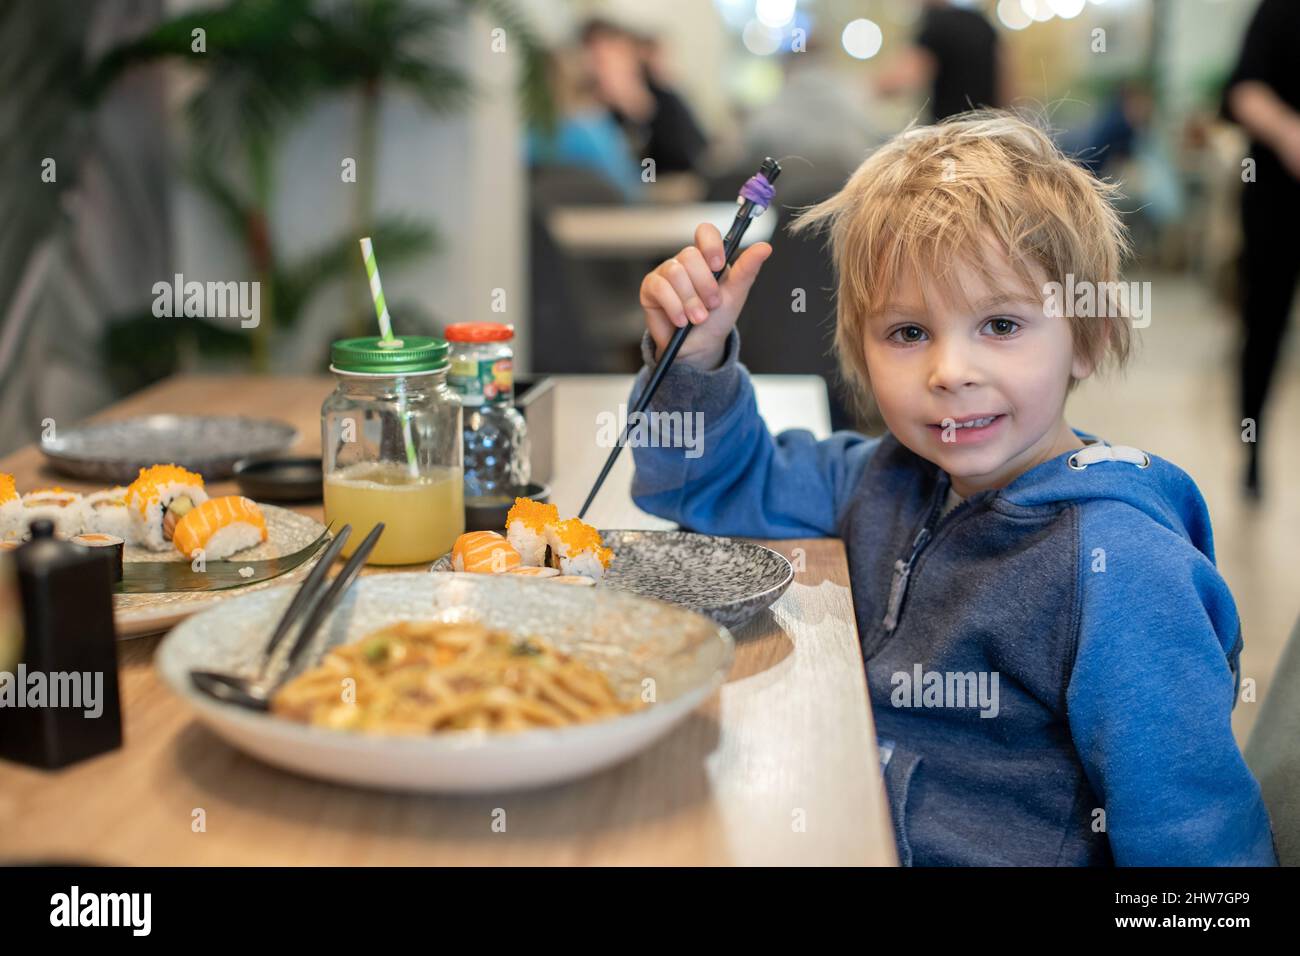 Child, eating japanese sushi and noodles with chopsticks in a restaurant, dinnertime Stock Photo